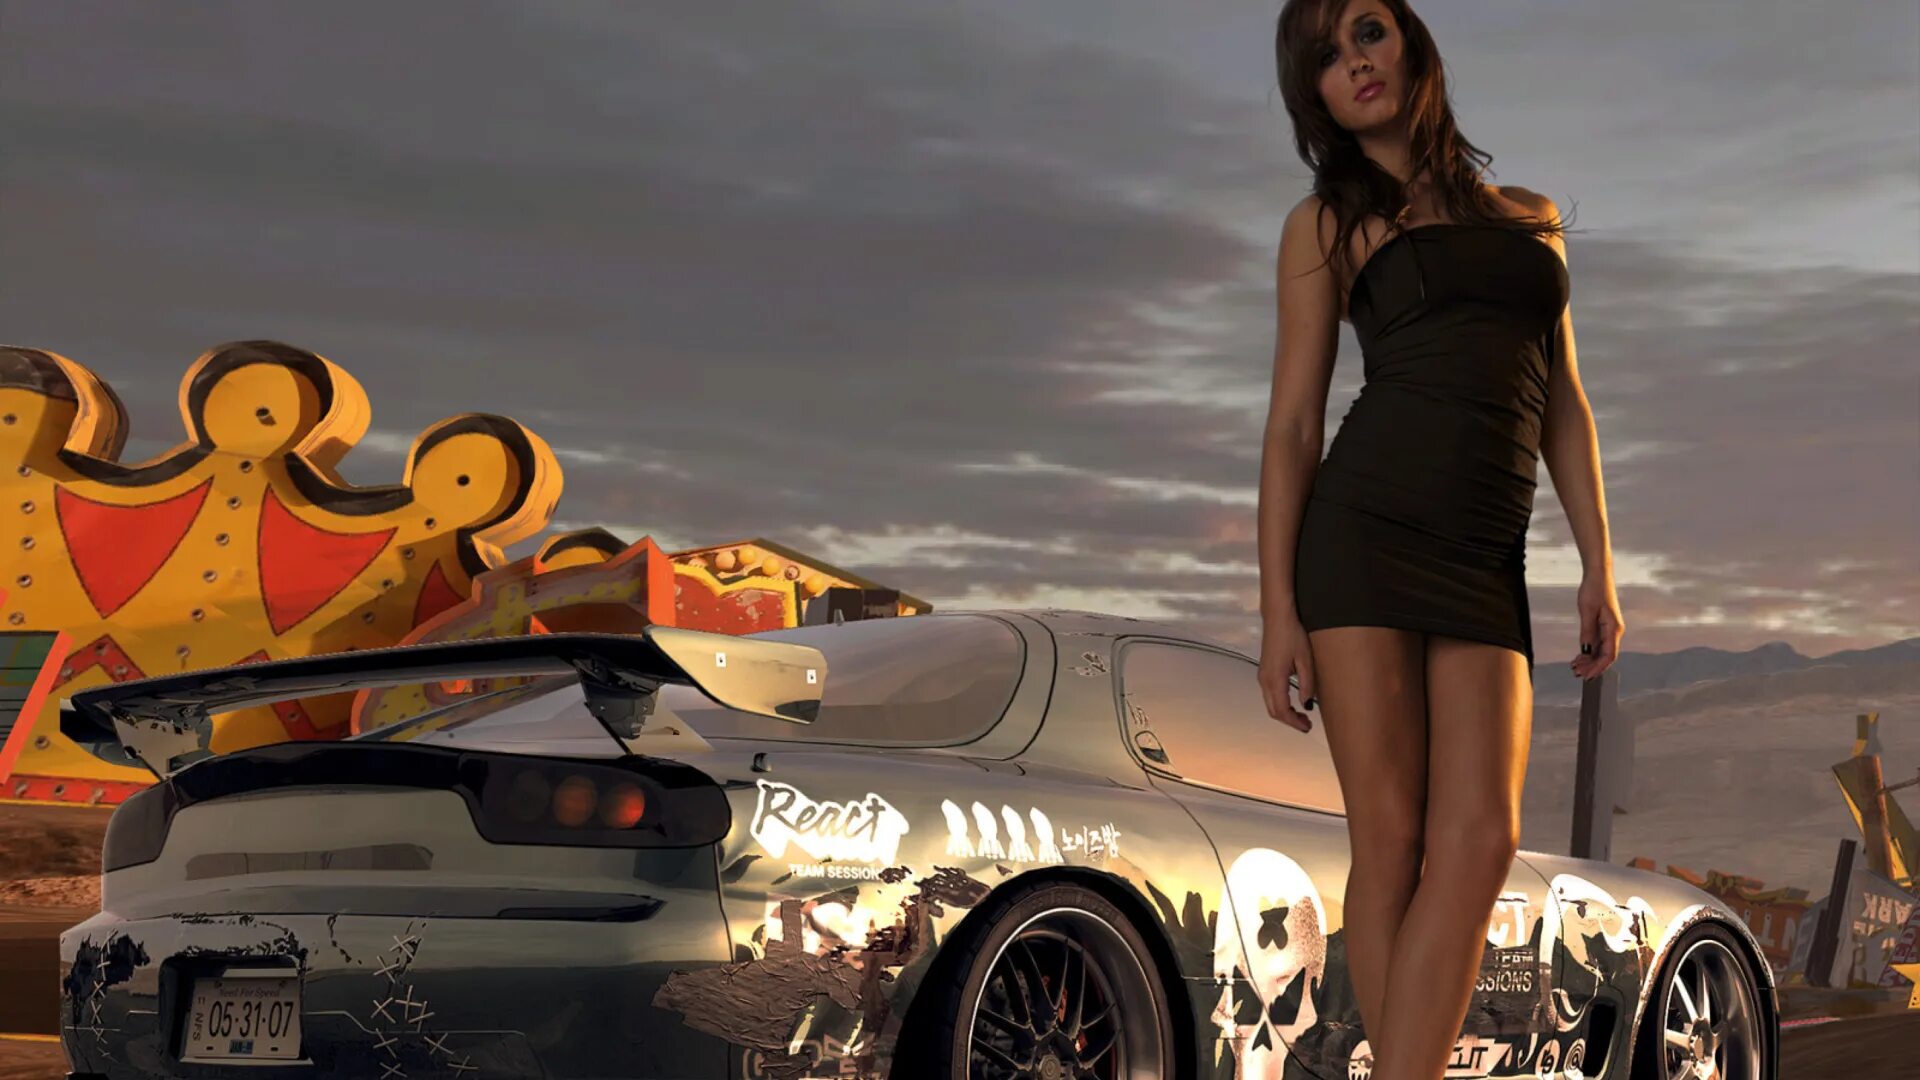 Blonde needs. Need for Speed: PROSTREET. Need for Speed PROSTREET девочки. Кристал форскатт need for Speed PROSTREET.